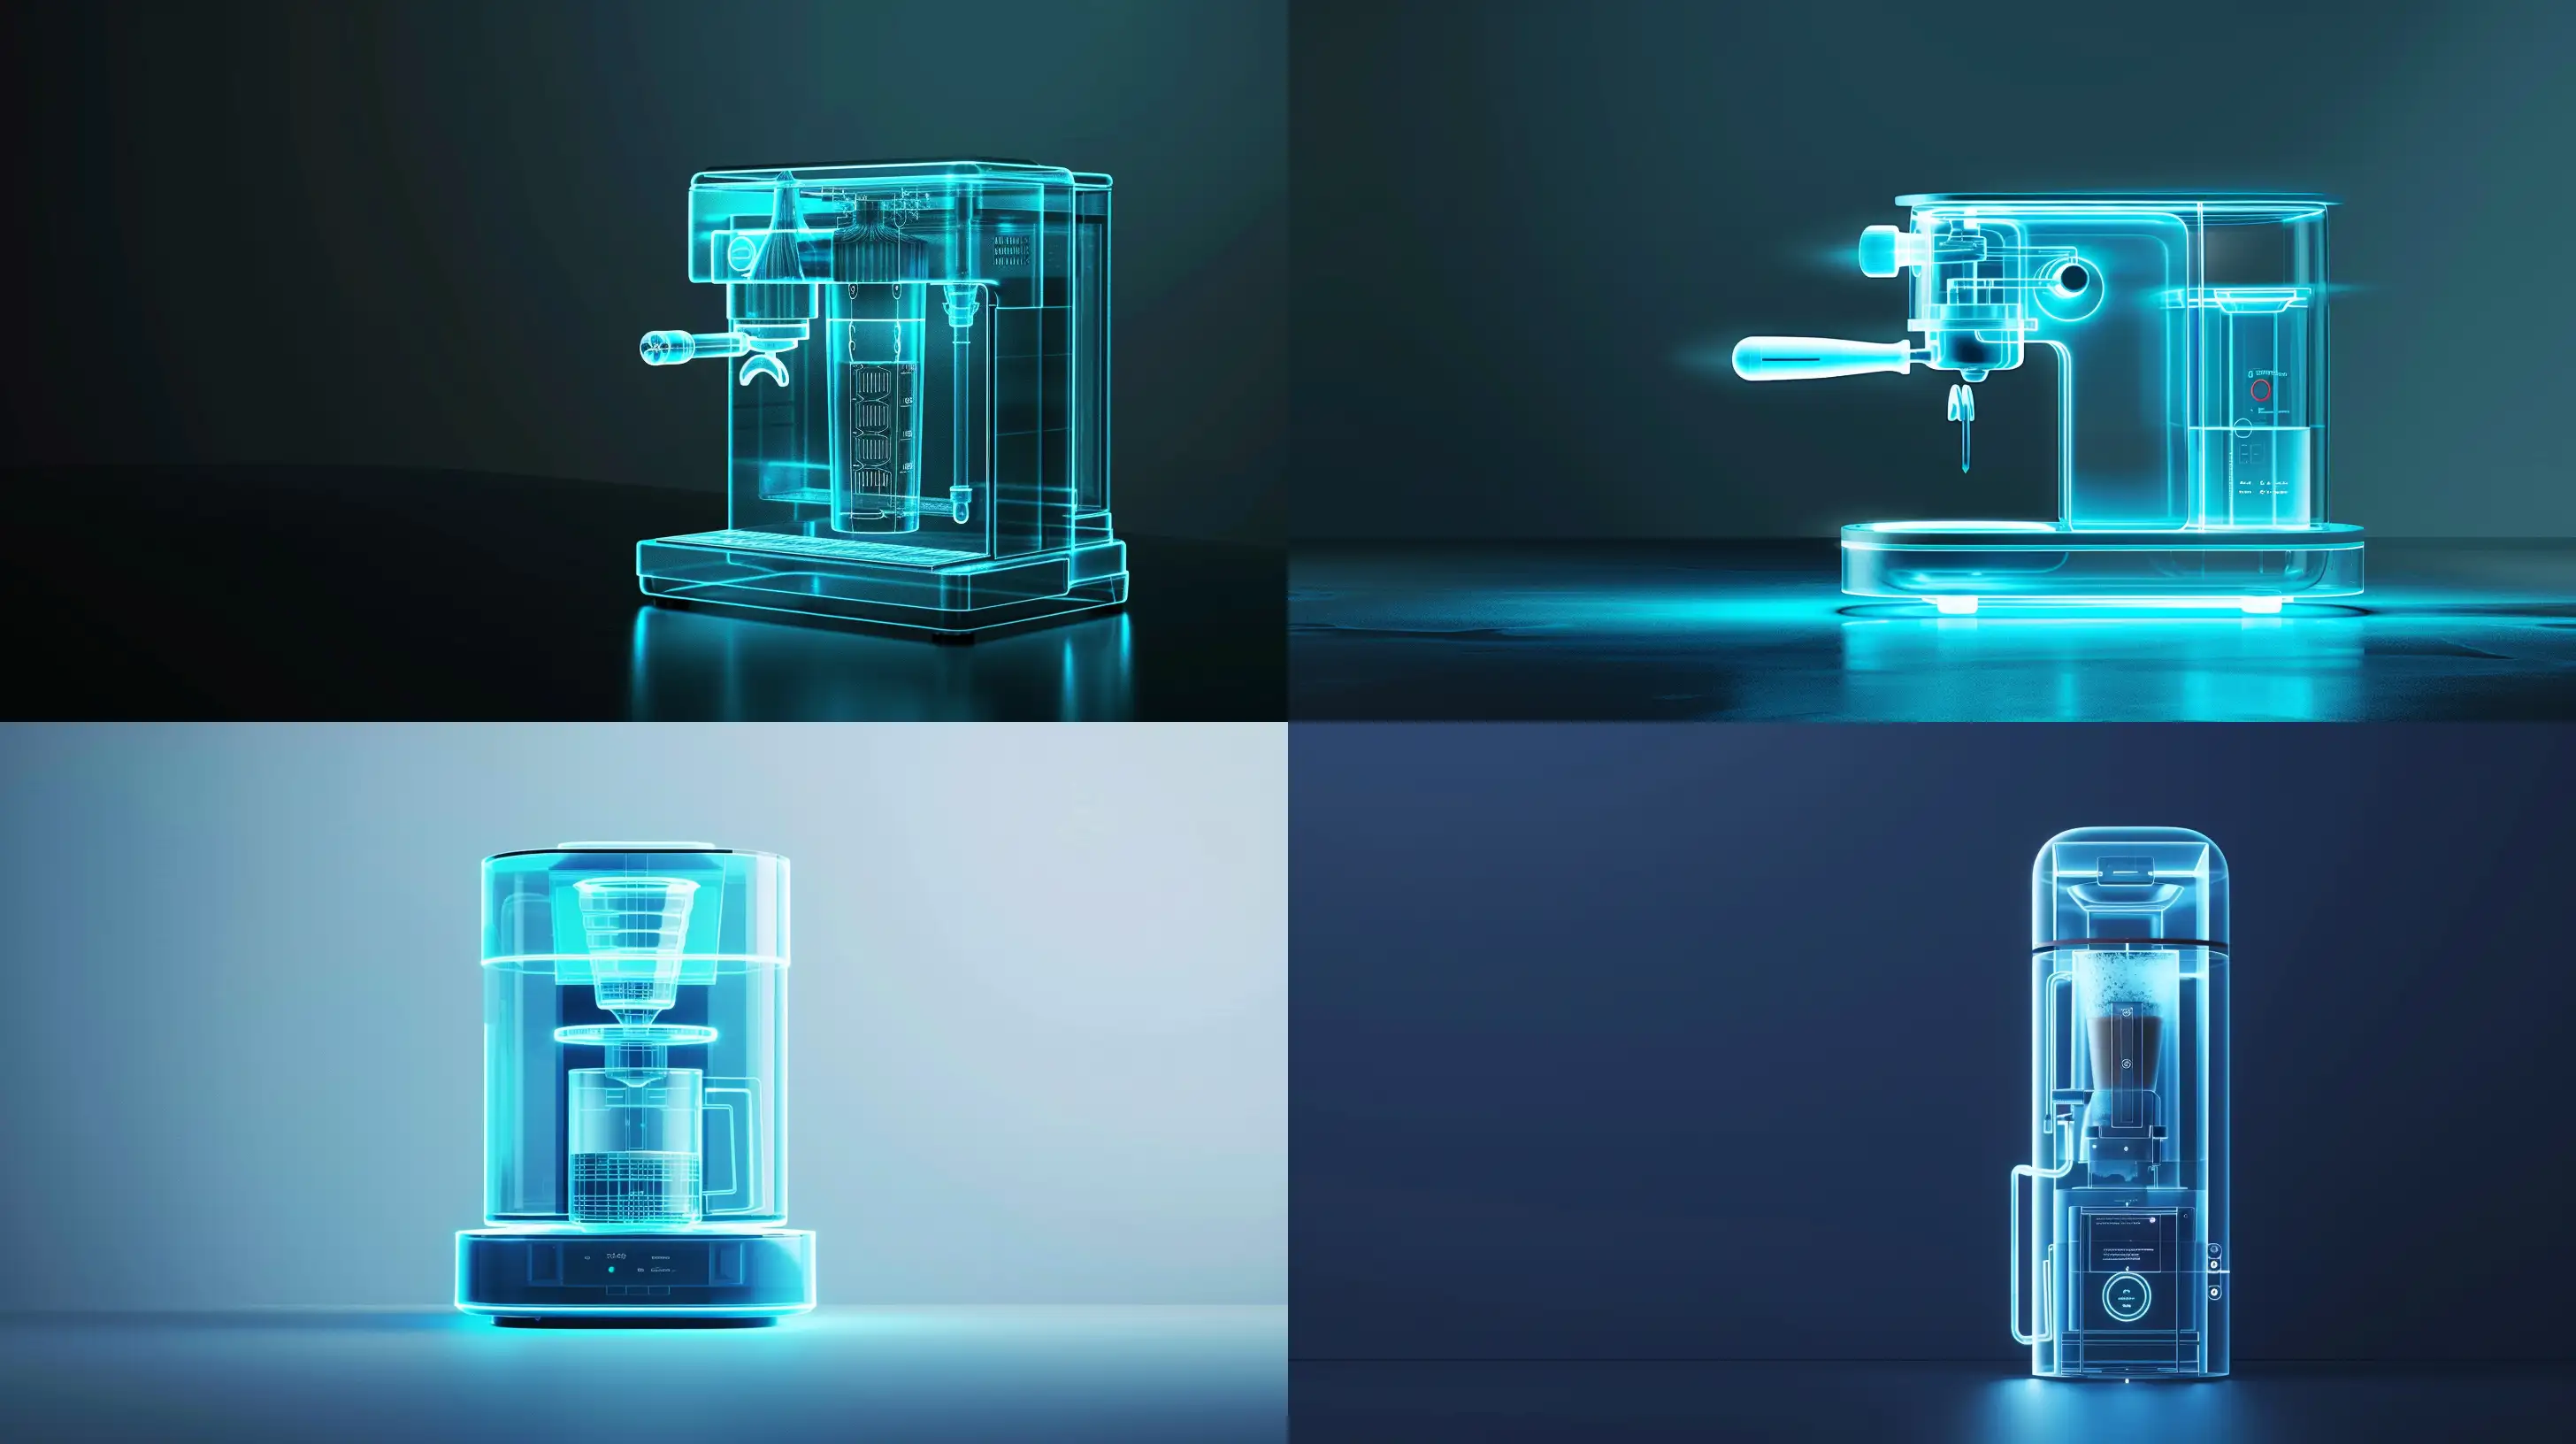 Create a minimalist smart coffee maker image, with an x-ray vision effect that reveals its intricate, AI-enhanced brewing system. The design should be bathed in a subtle neon blue light, standing out on a uniform background that doesn't distract from the device's elegance and smart features --ar 16:9